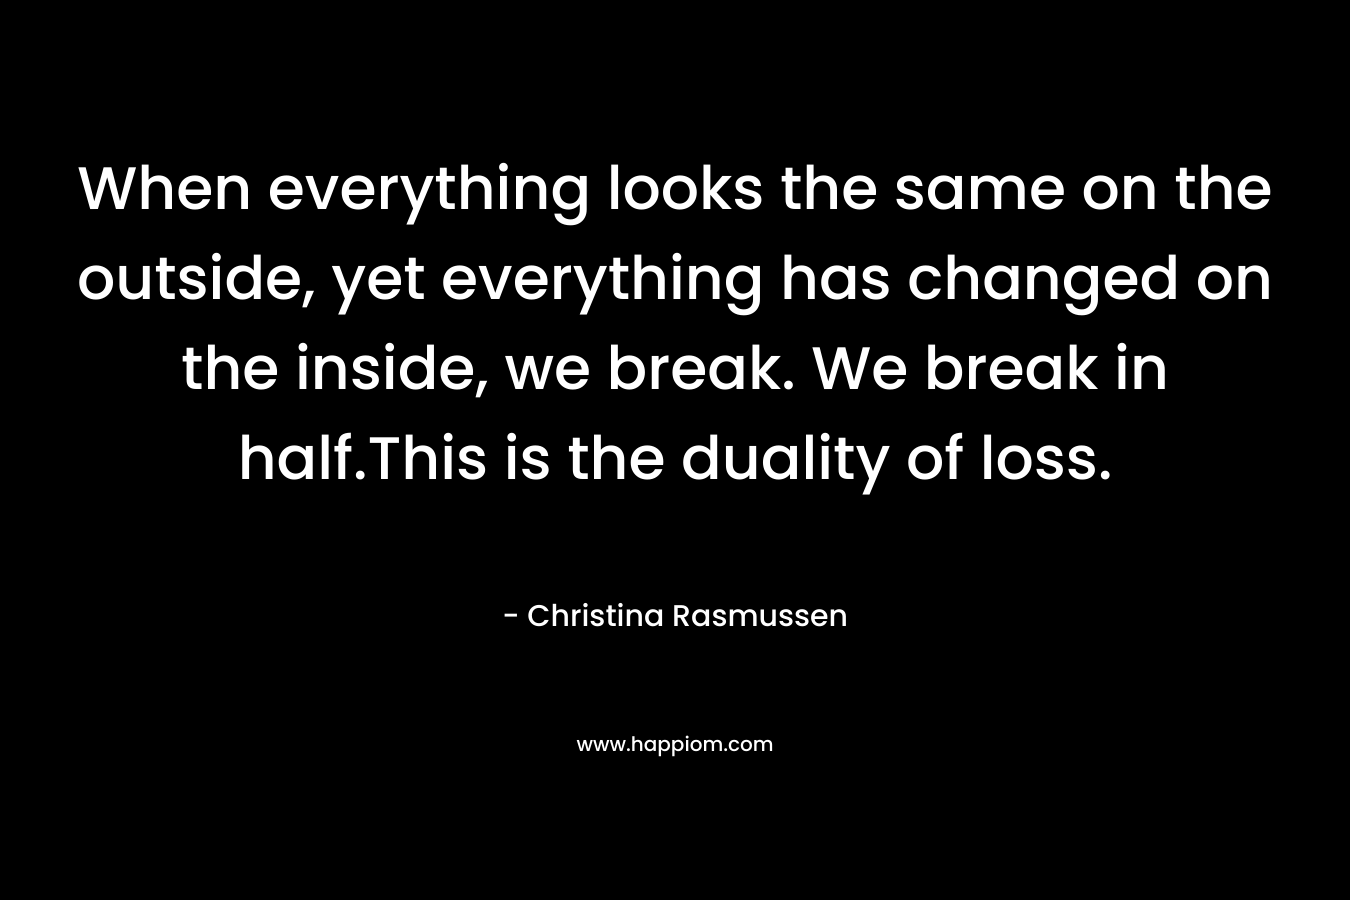 When everything looks the same on the outside, yet everything has changed on the inside, we break. We break in half.This is the duality of loss. – Christina Rasmussen